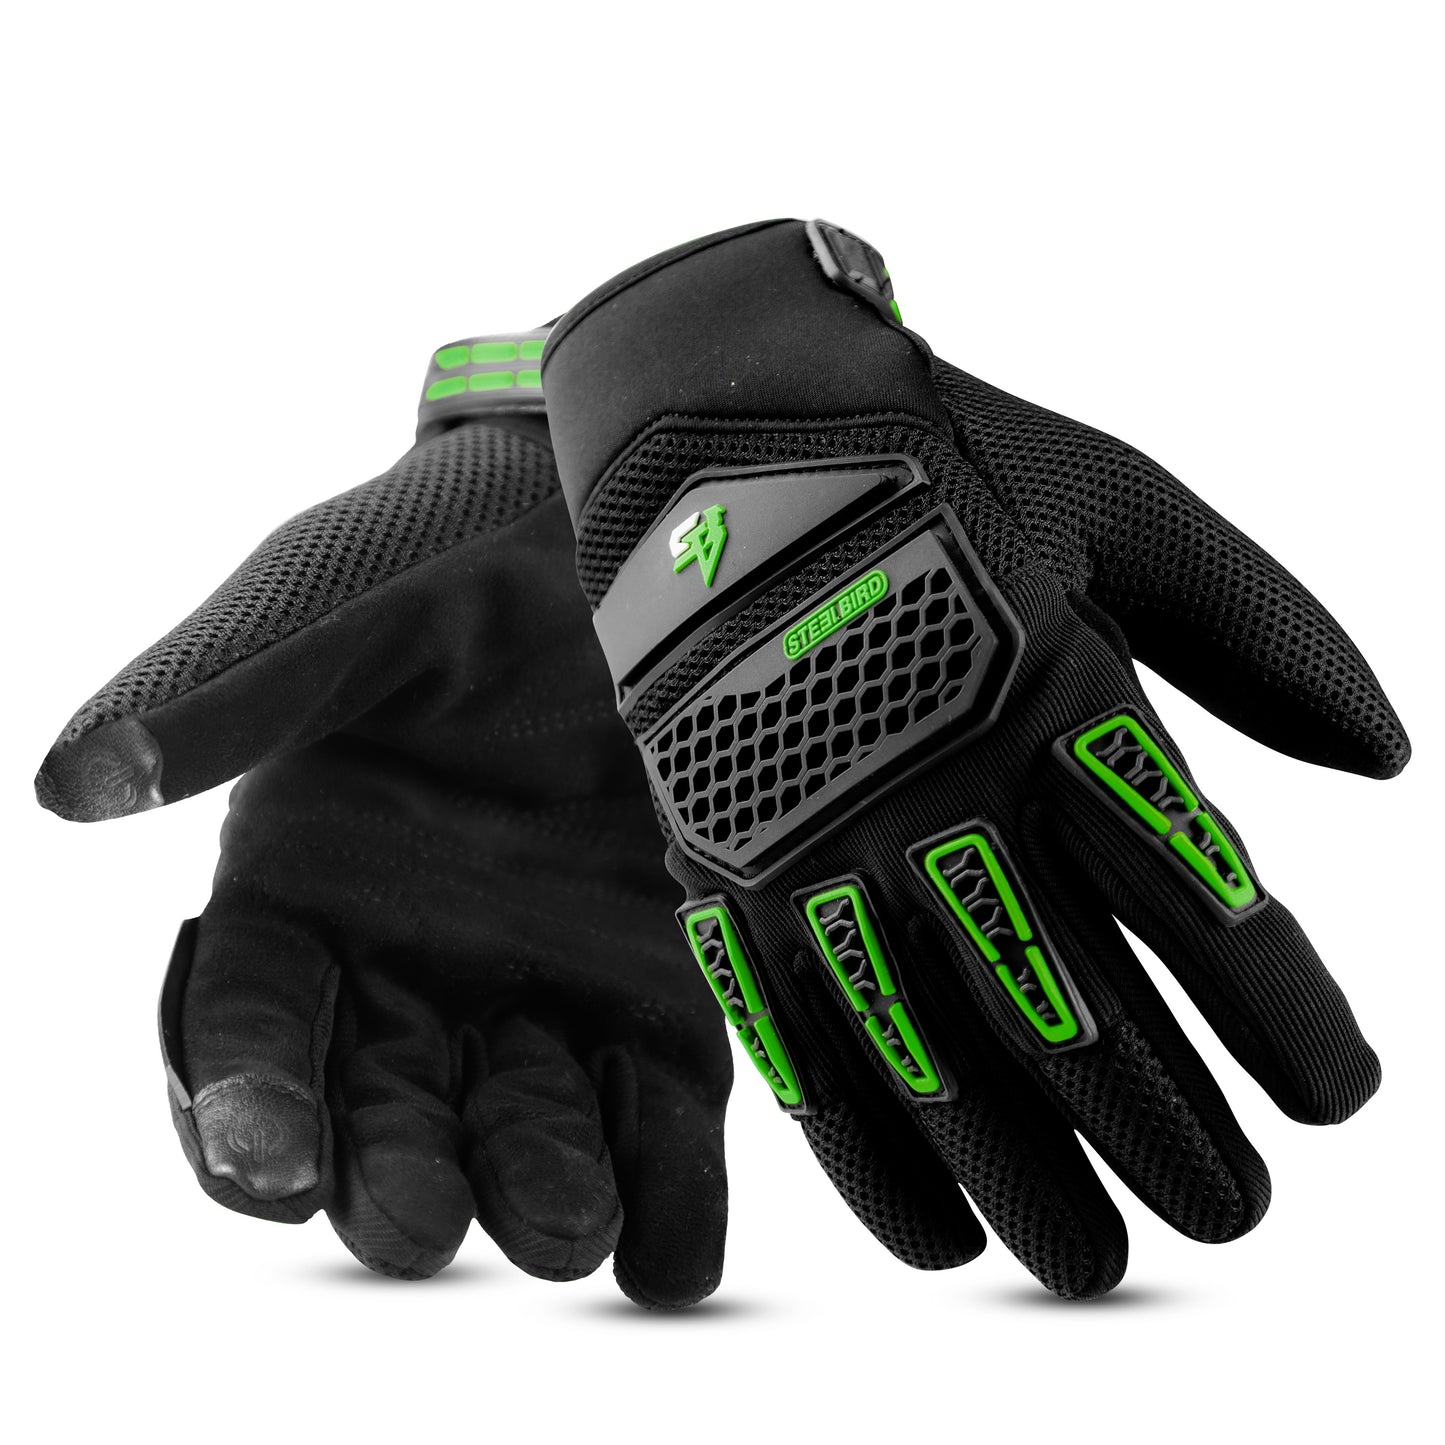 Steelbird Adventure A-2 Full Finger Bike Riding Gloves with Touch Screen Sensitivity at Thumb and Index Finger, Protective Off-Road Motorbike Racing (Green)